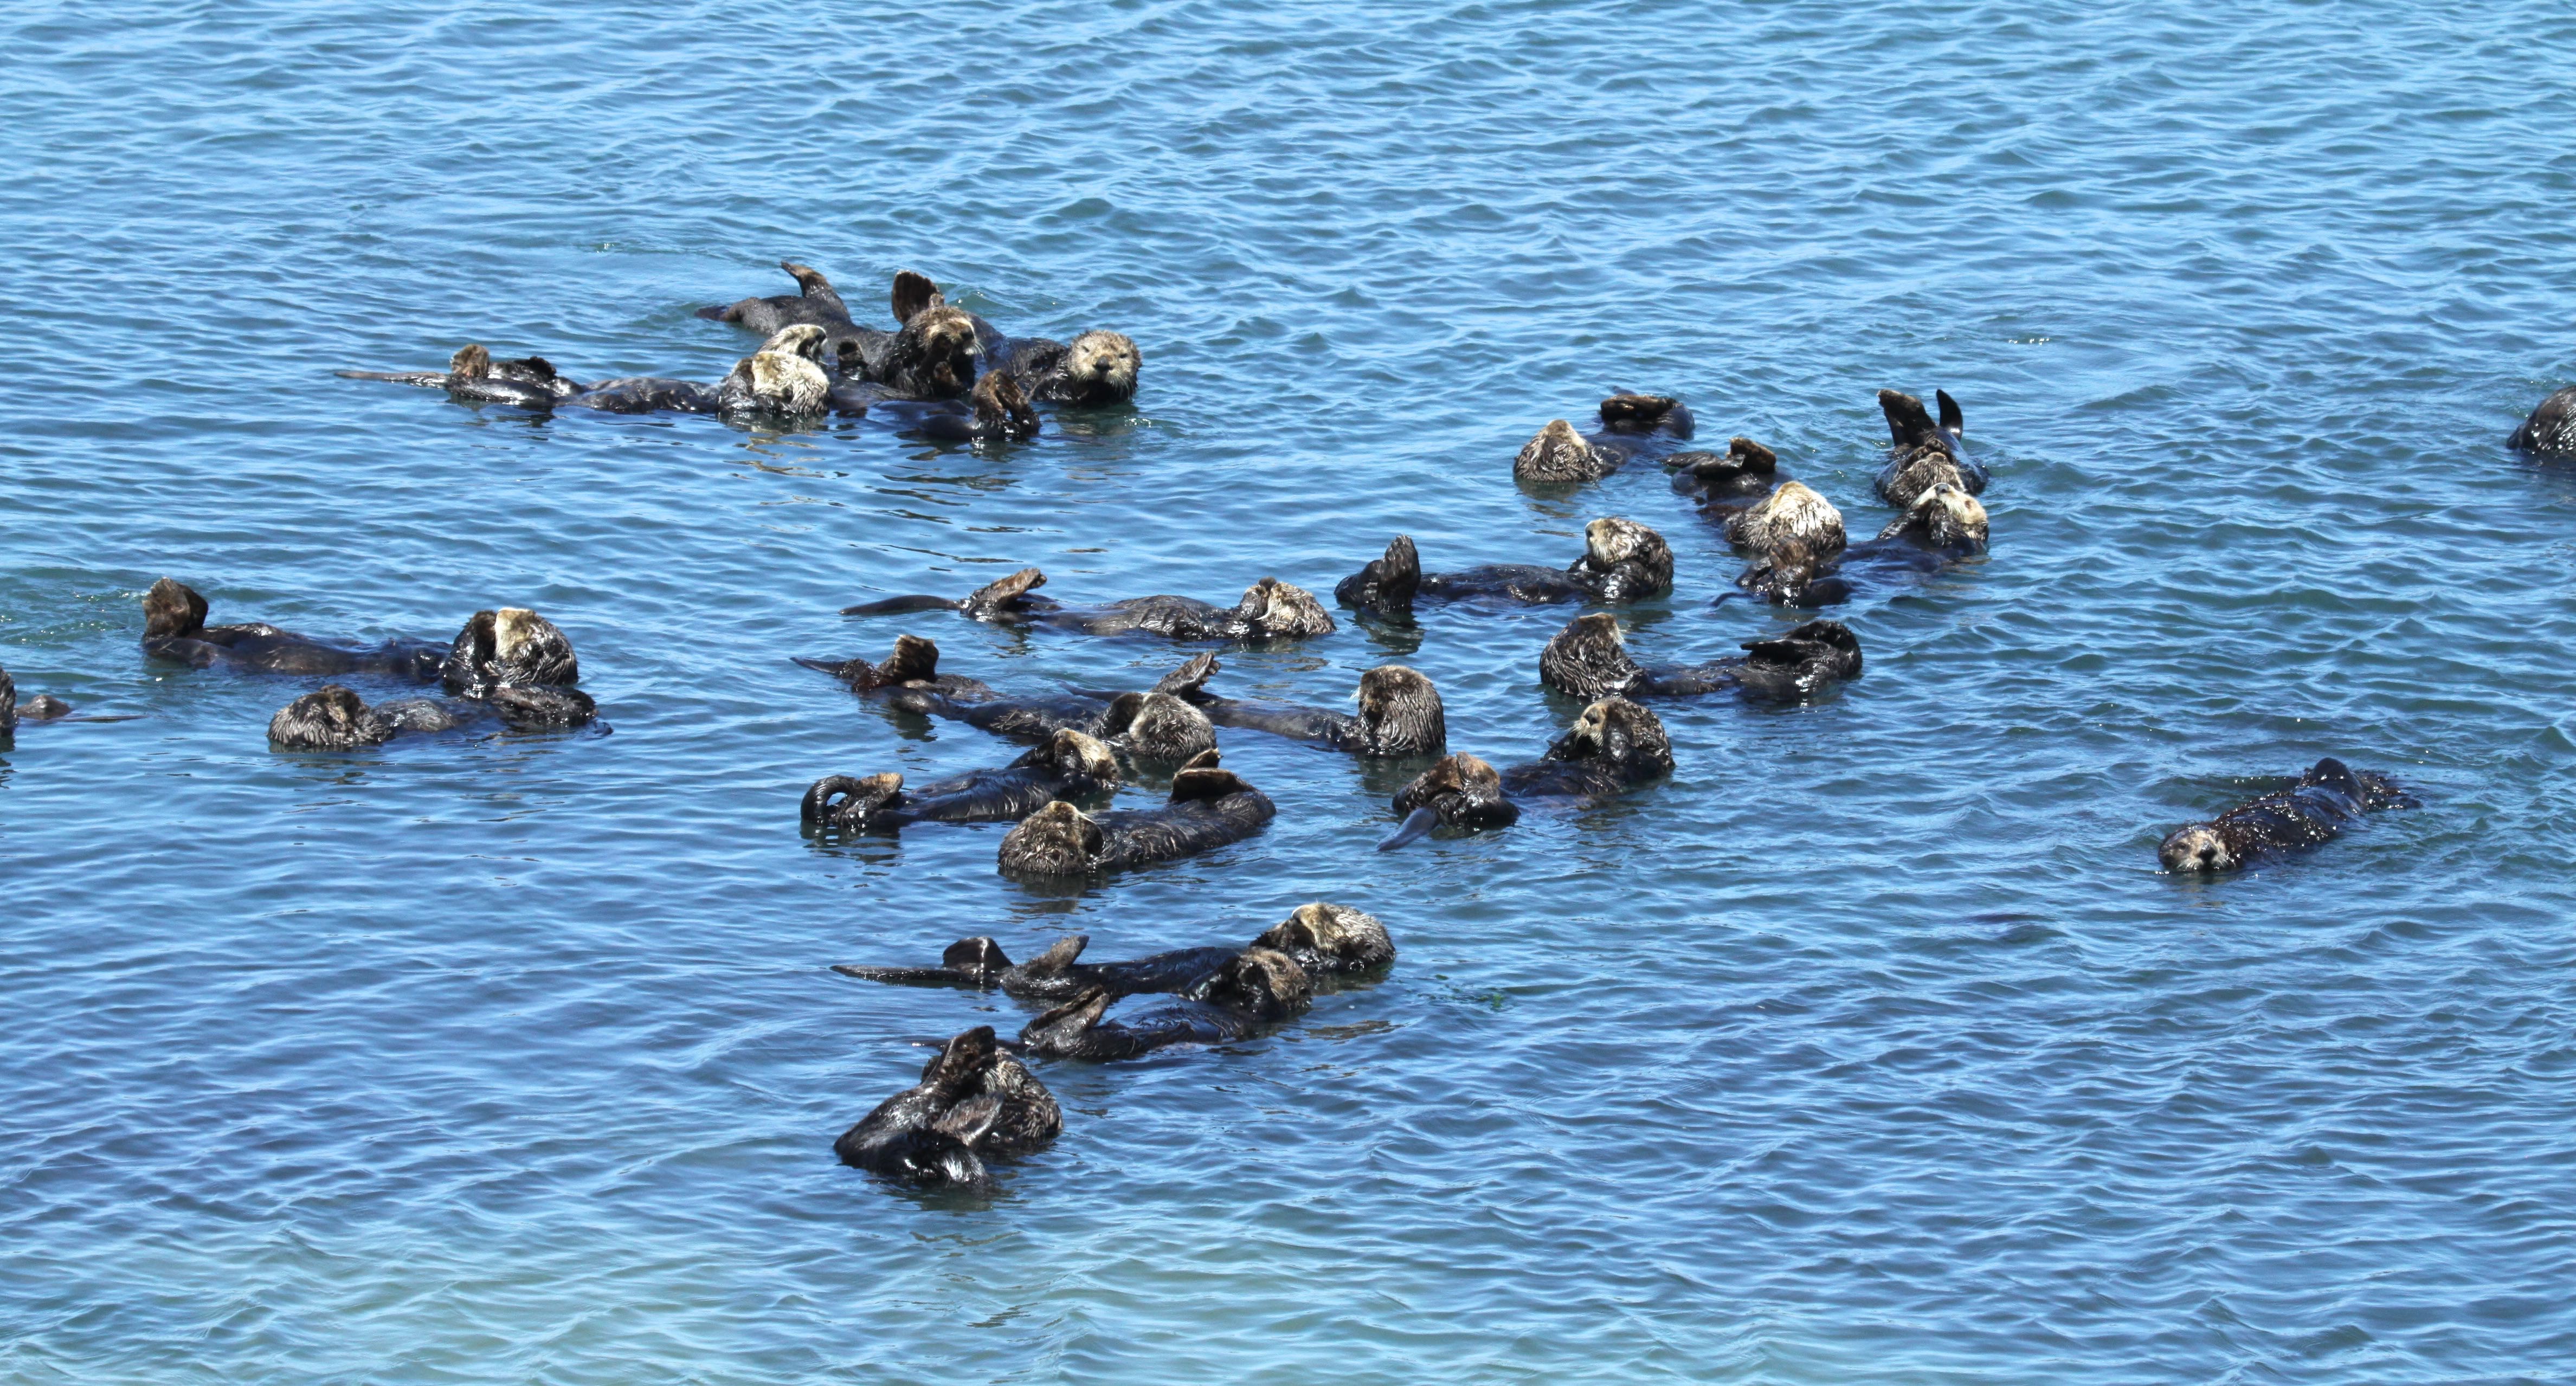 Southern sea otters float close together at Moss Landing, California. Photo by Lilian Carswell/USFWS taken on June 13, 2018.